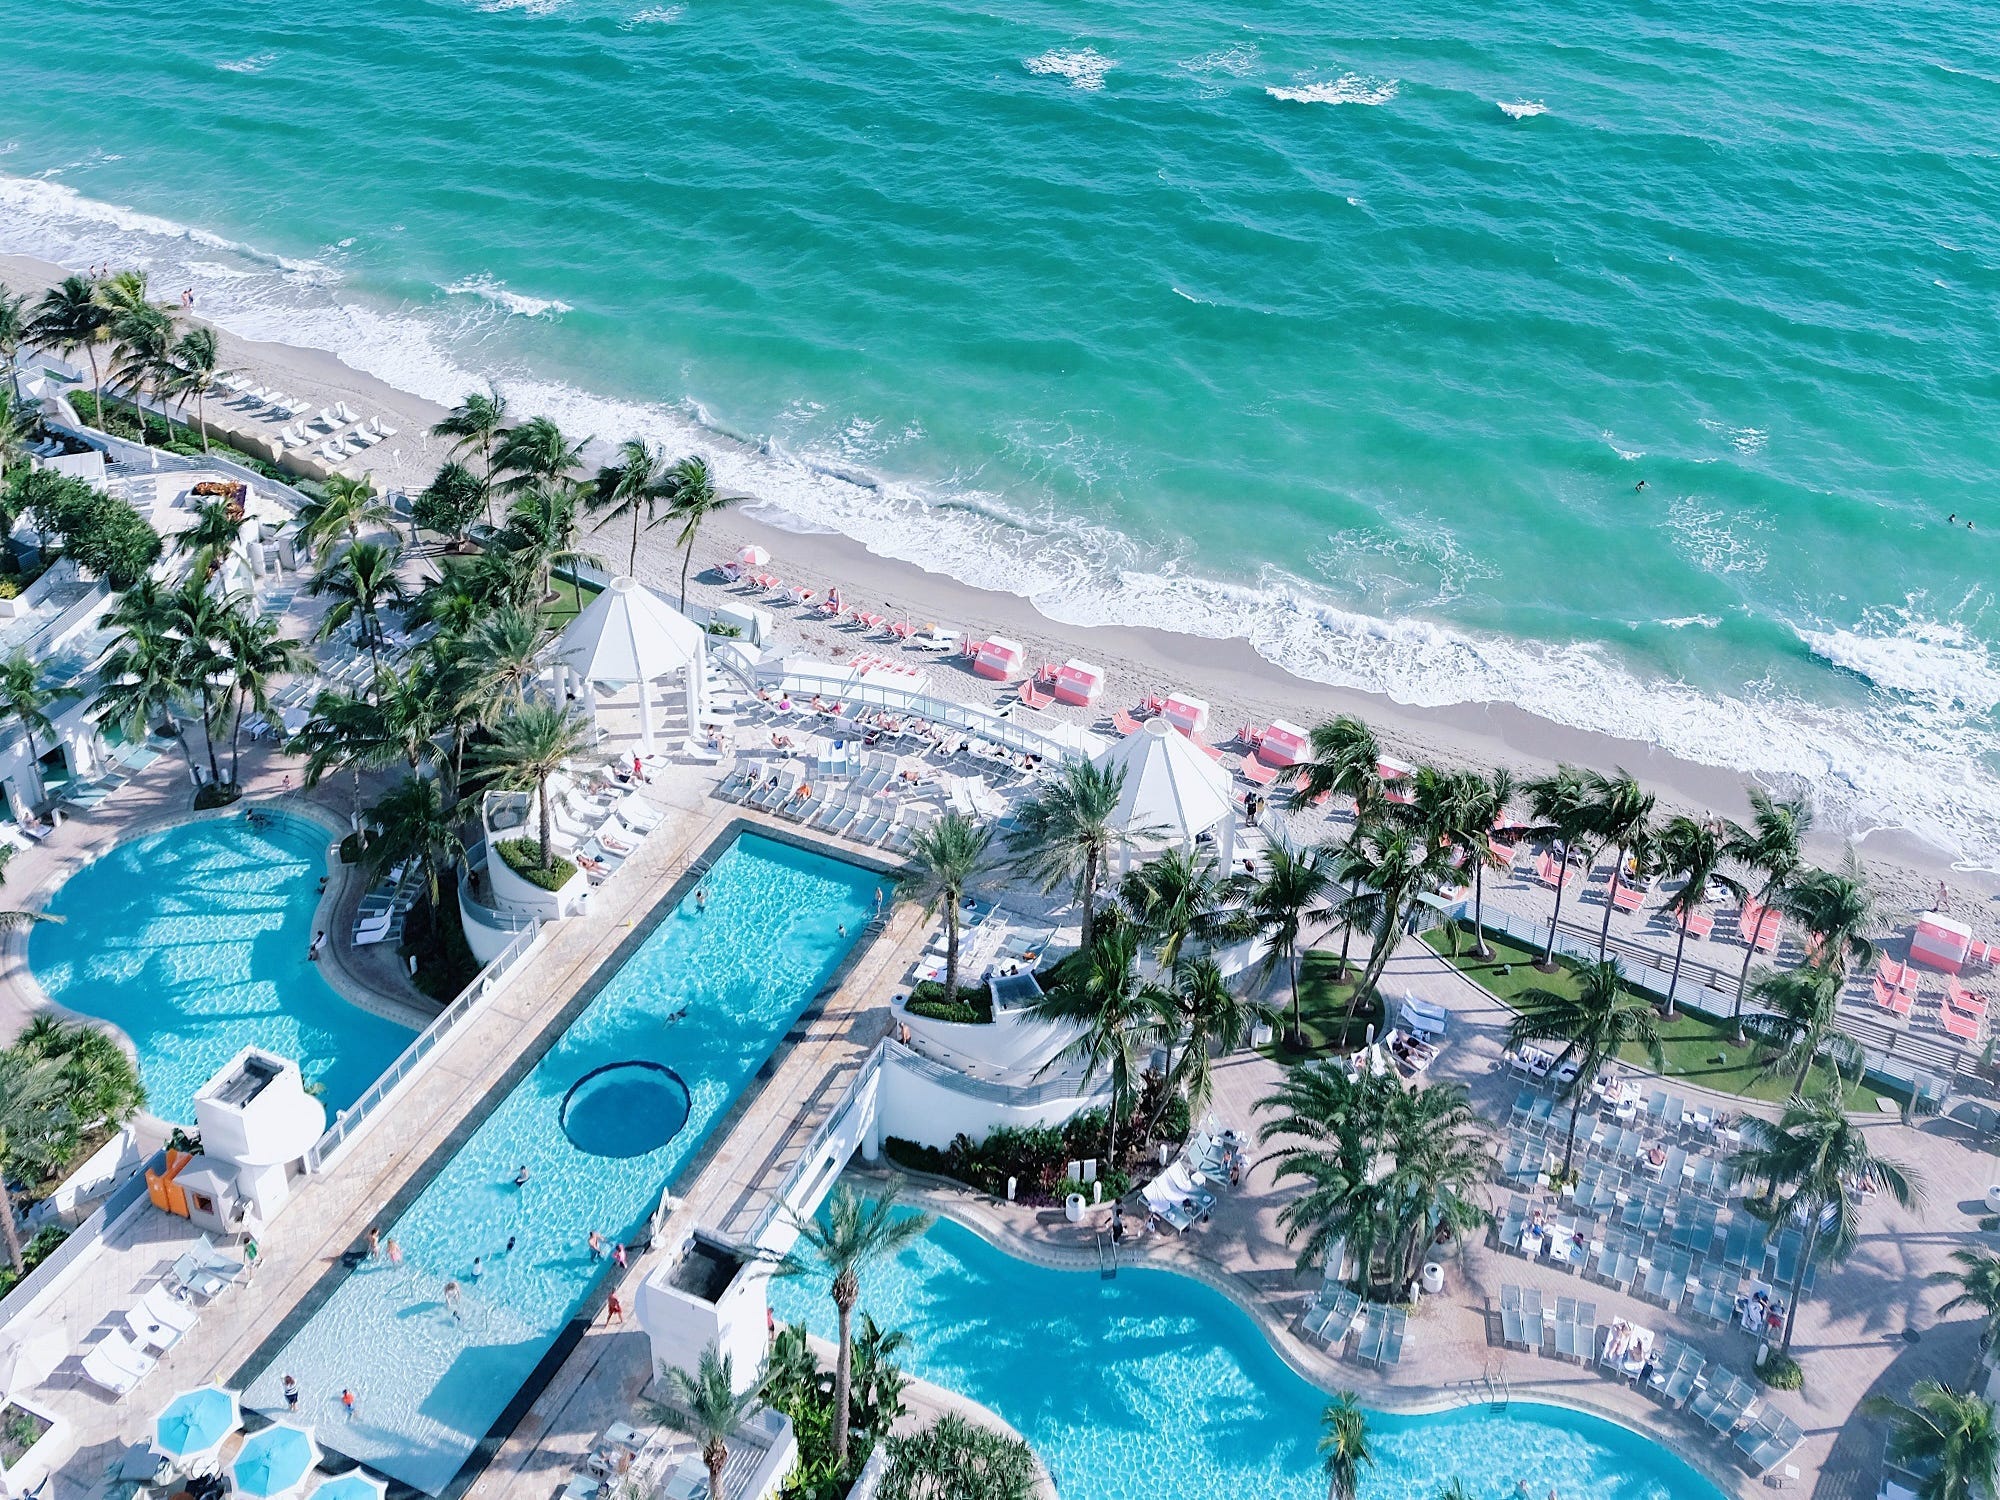 Best beach hotels in the US - aerial shot of the pools, beach, and ocean at The Diplomat hotel